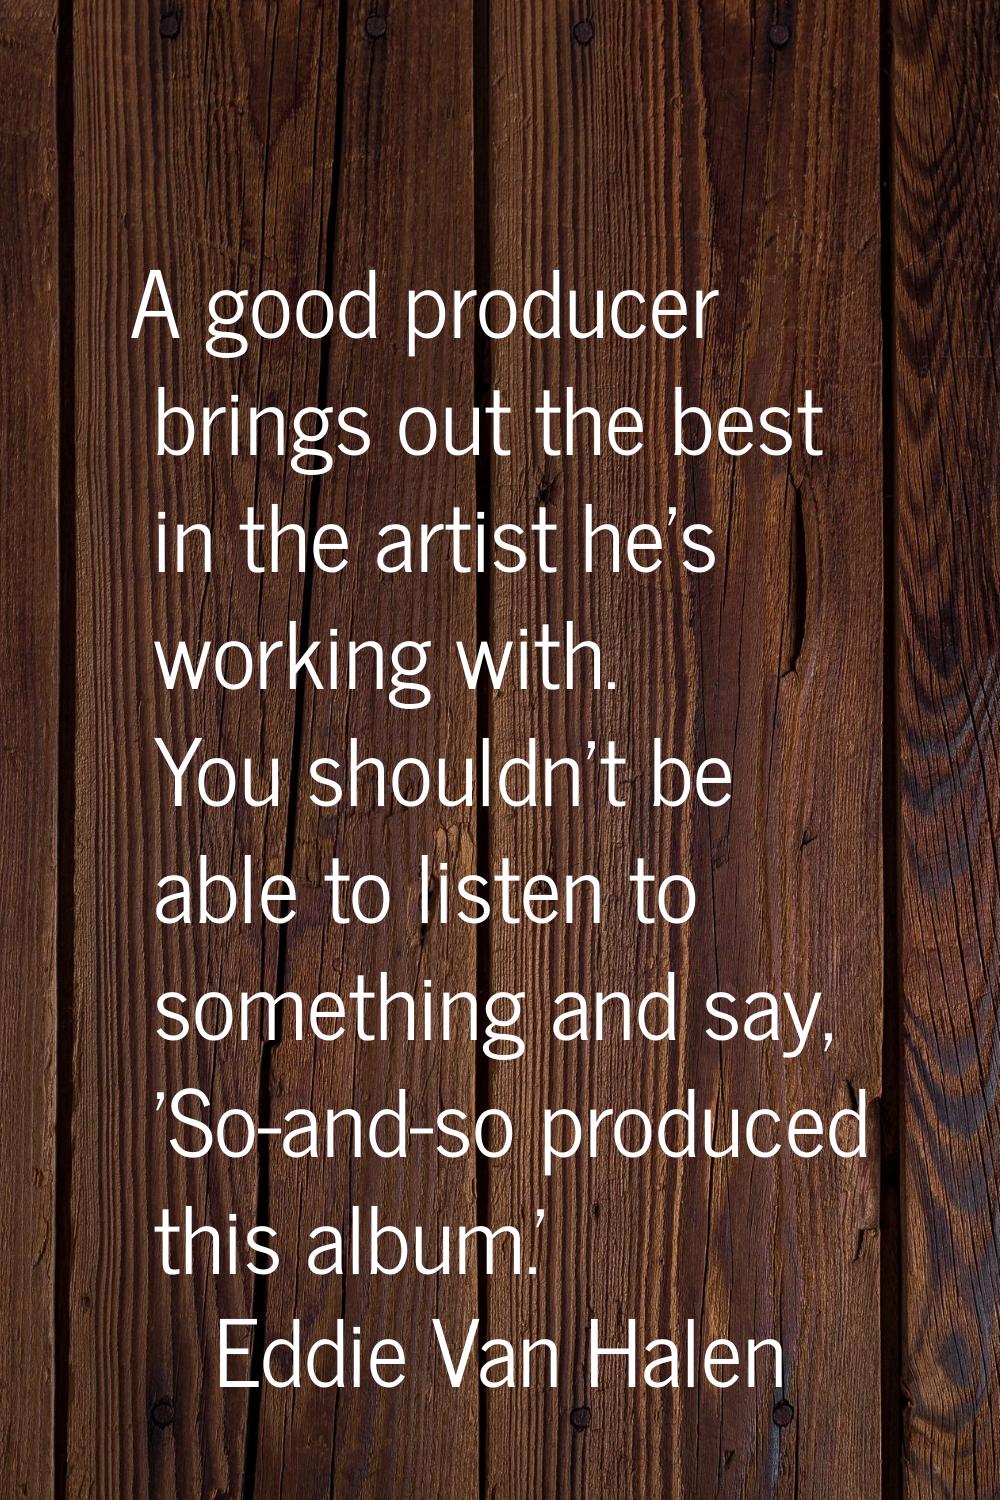 A good producer brings out the best in the artist he's working with. You shouldn't be able to liste